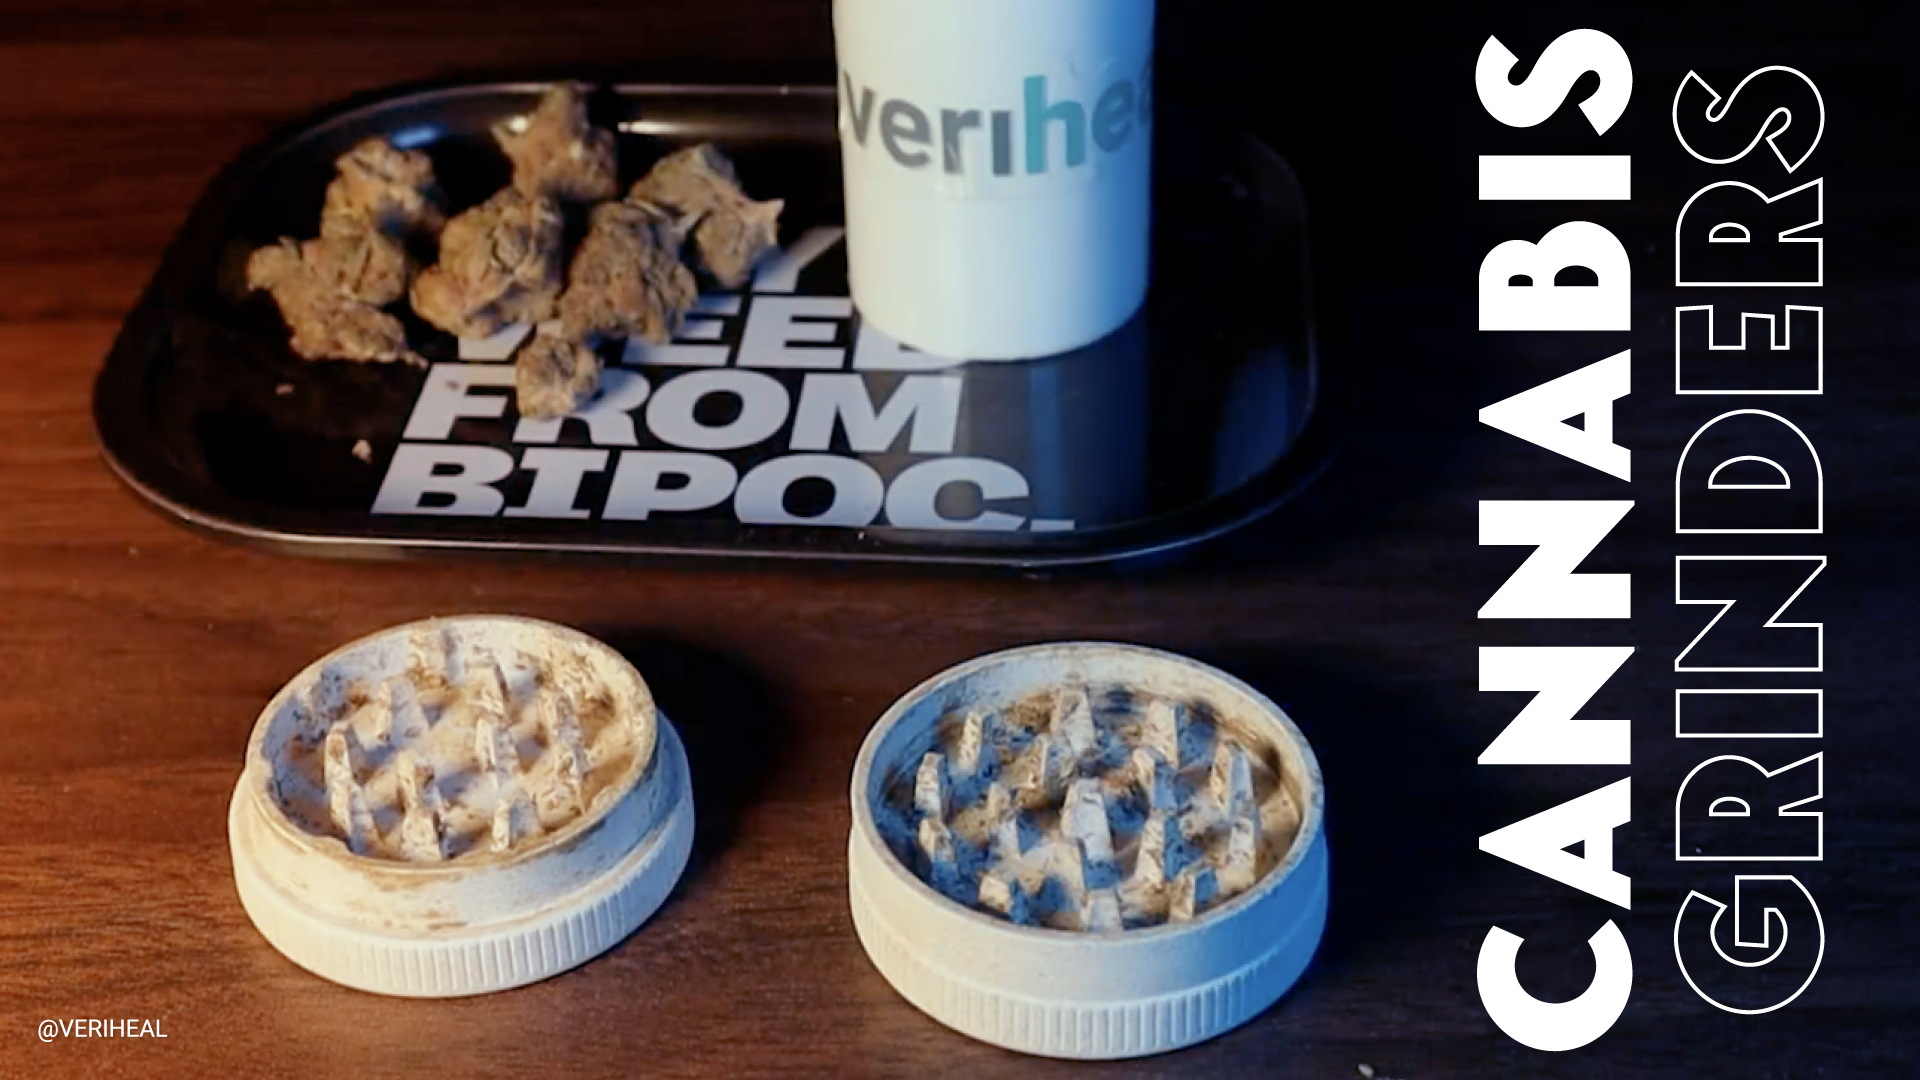 Ask a Budtender: Do You Need a Cannabis Grinder?